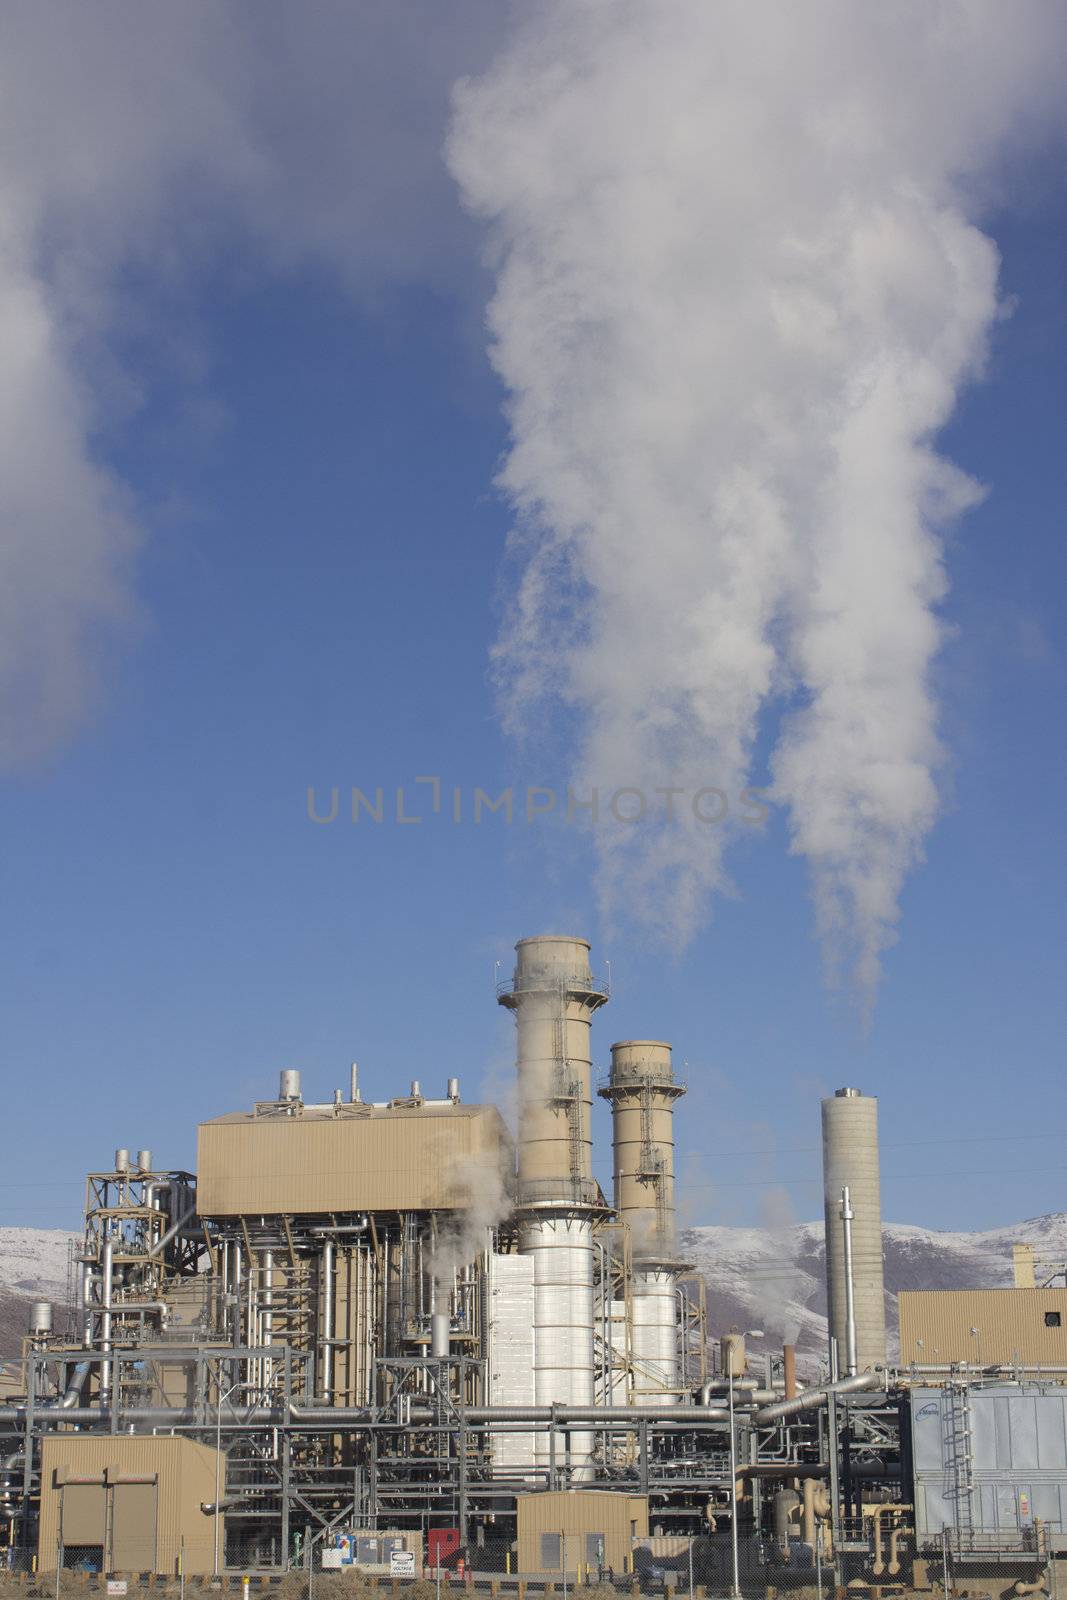 Power Plant smokestacks with blue skies and mountains